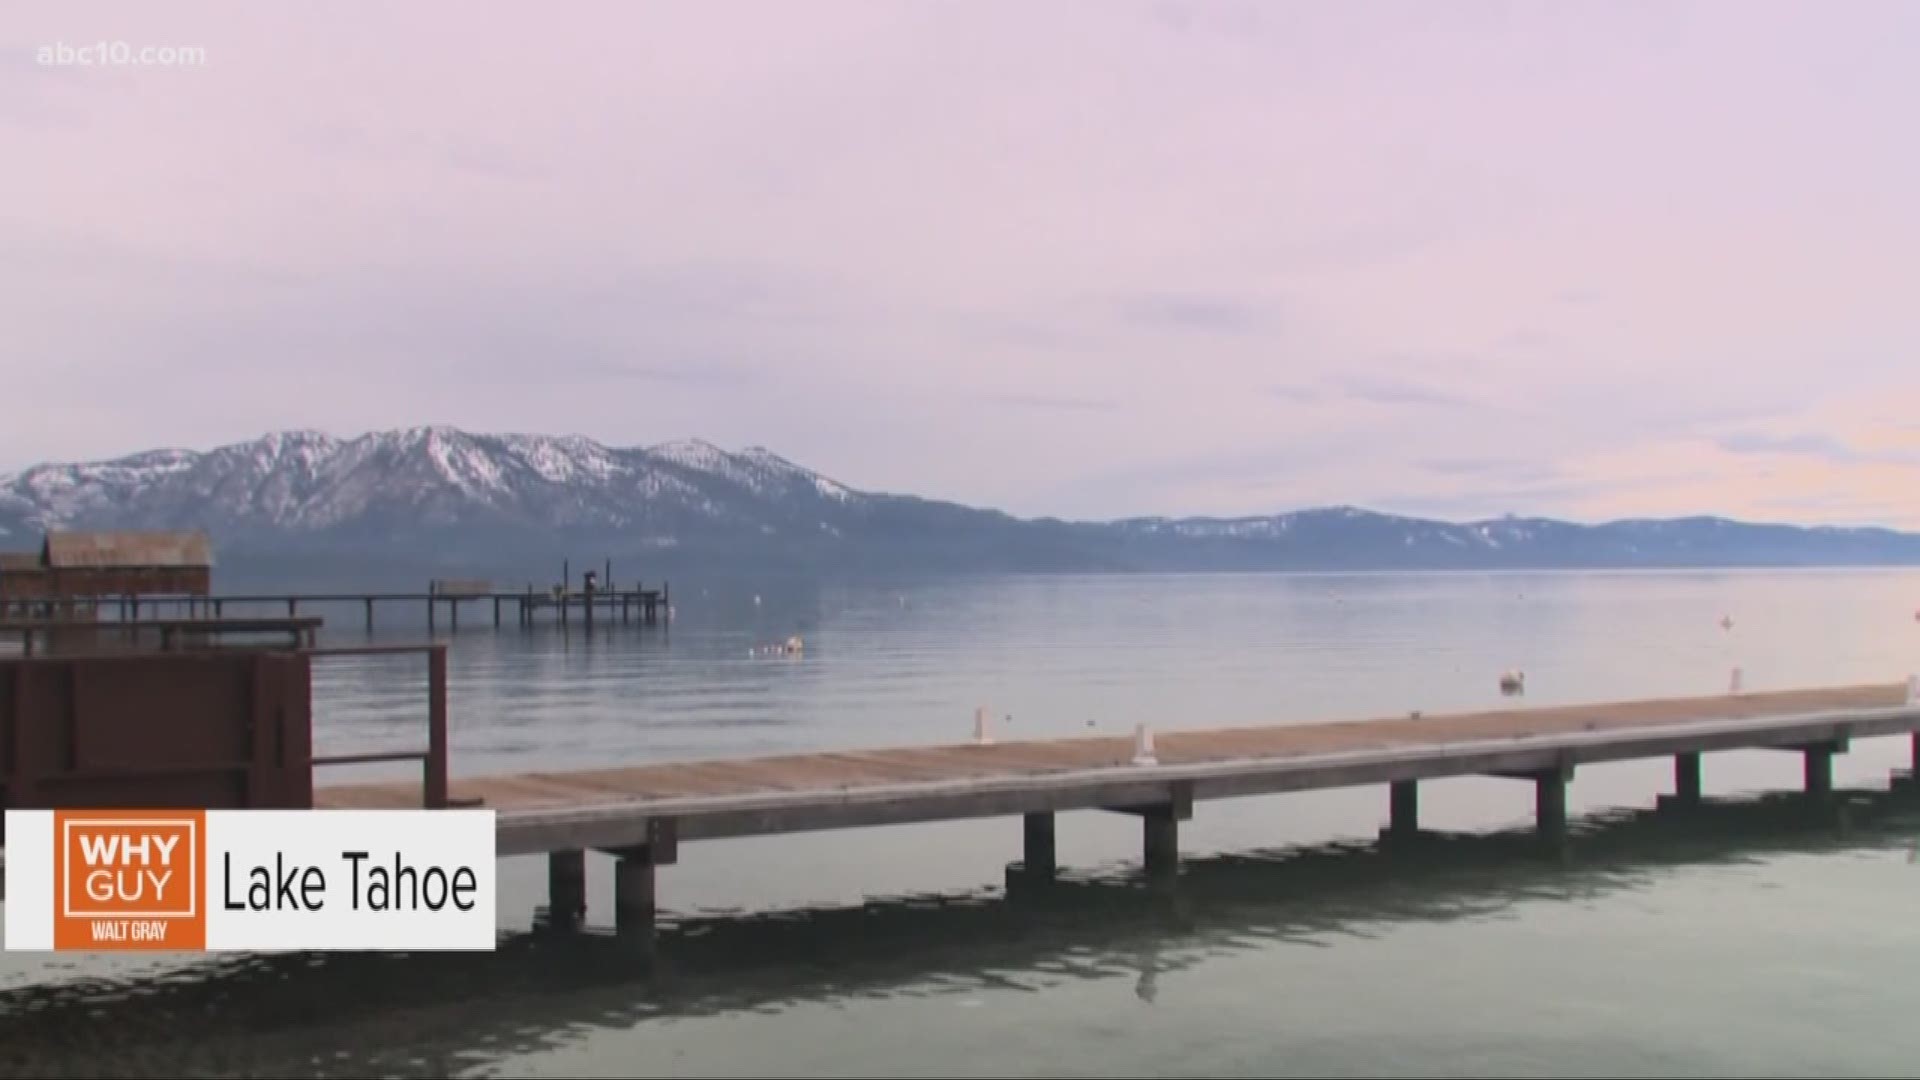 Today's WHYGUY question comes to us via email from Clifton: "Why is Lake Tahoe named that?" Check out Walt’s Why Guy story Wednesdays on #MorningBlend10 at 5-7 a.m.